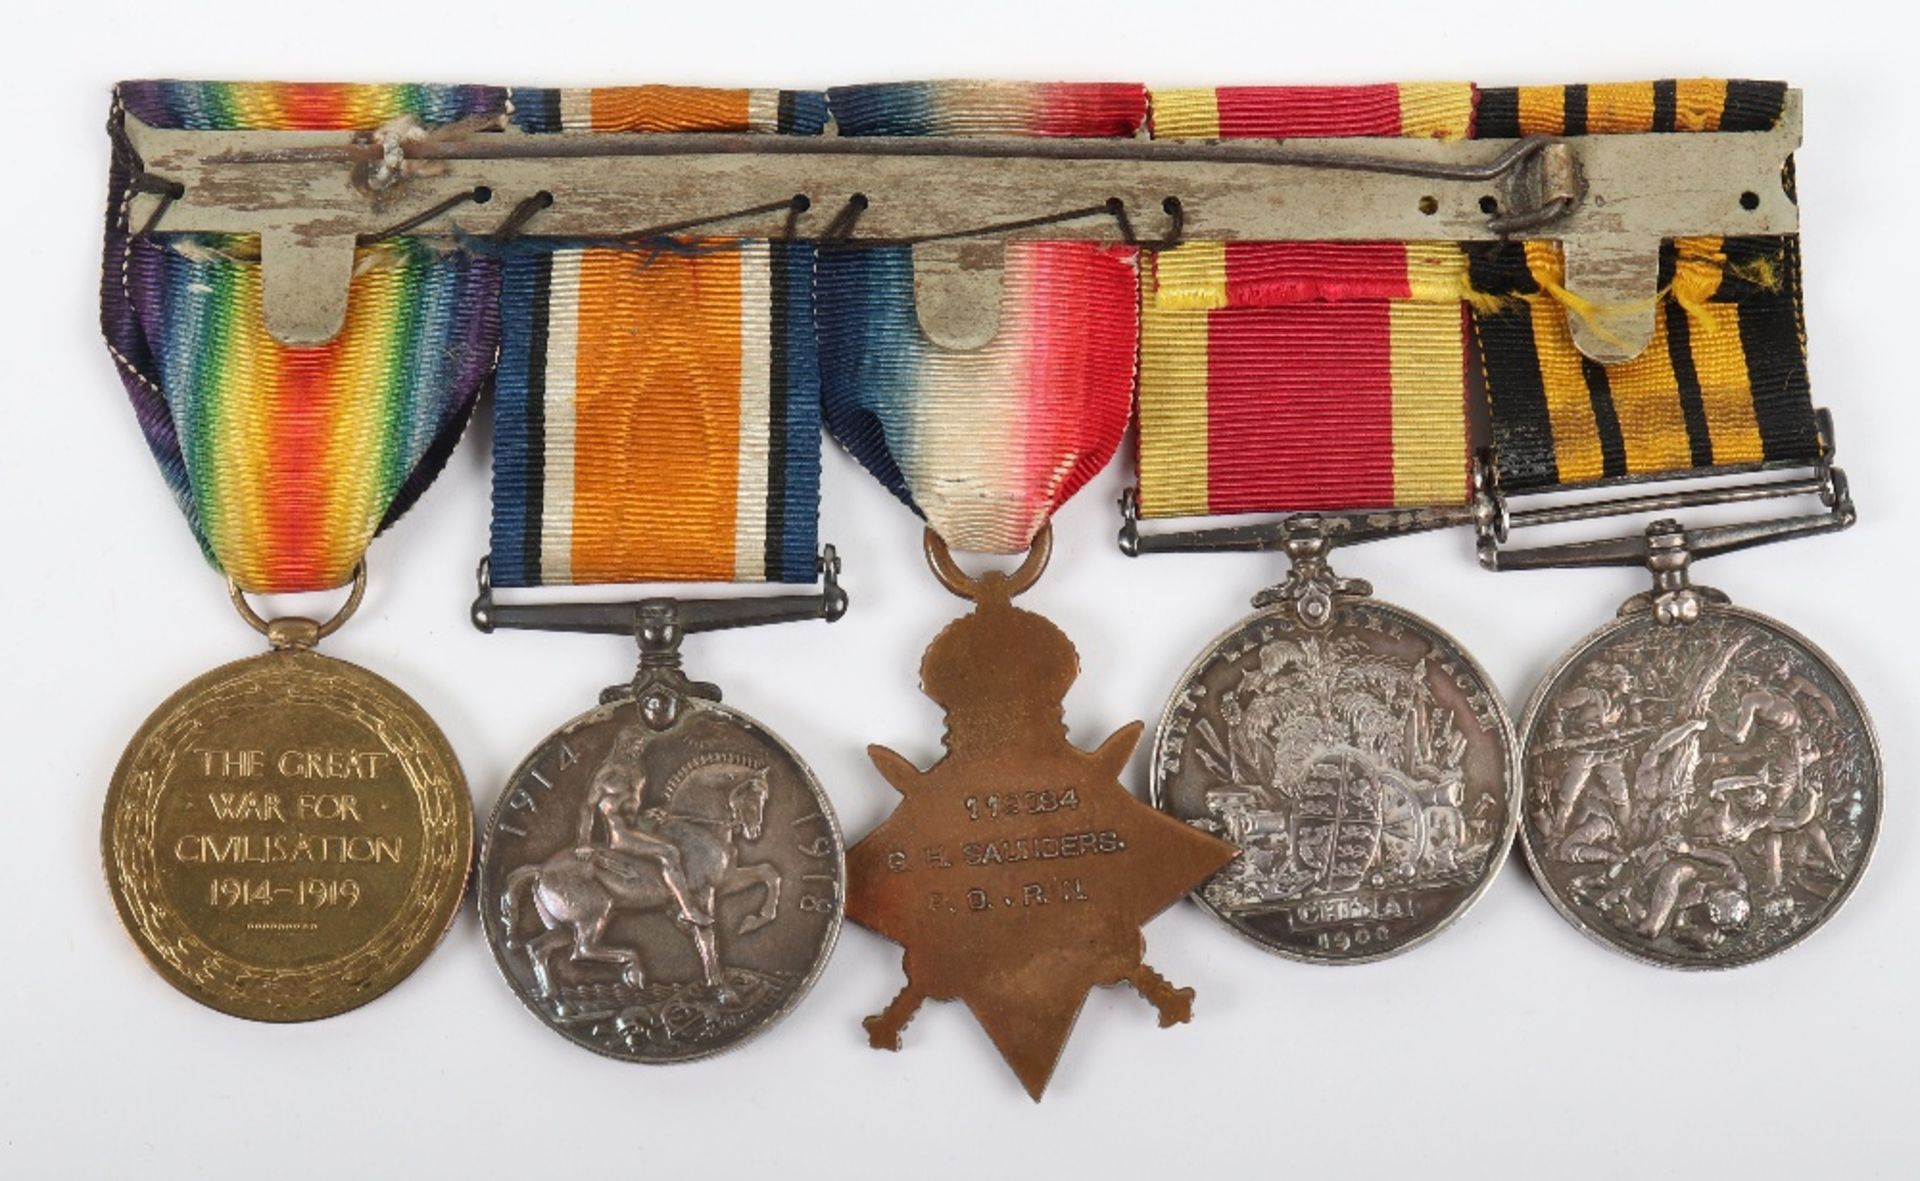 East West Africa, China 1900 and Great War Medal Group of Five Royal Navy - Image 9 of 12